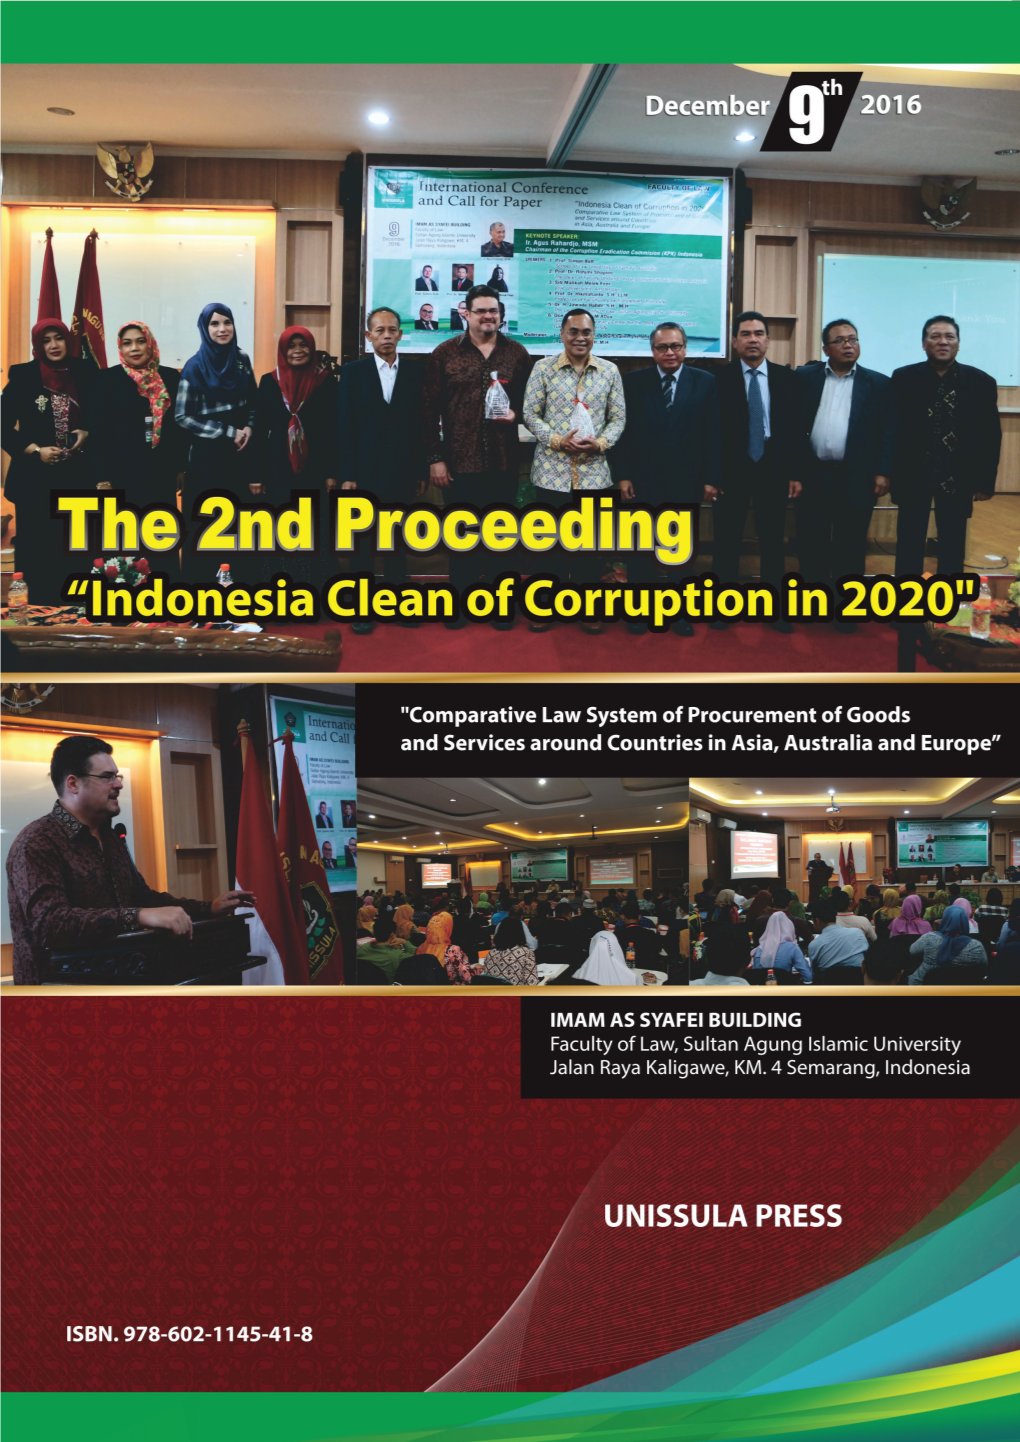 The 2Nd Proceeding “Indonesia Clean of Corruption in 2020”